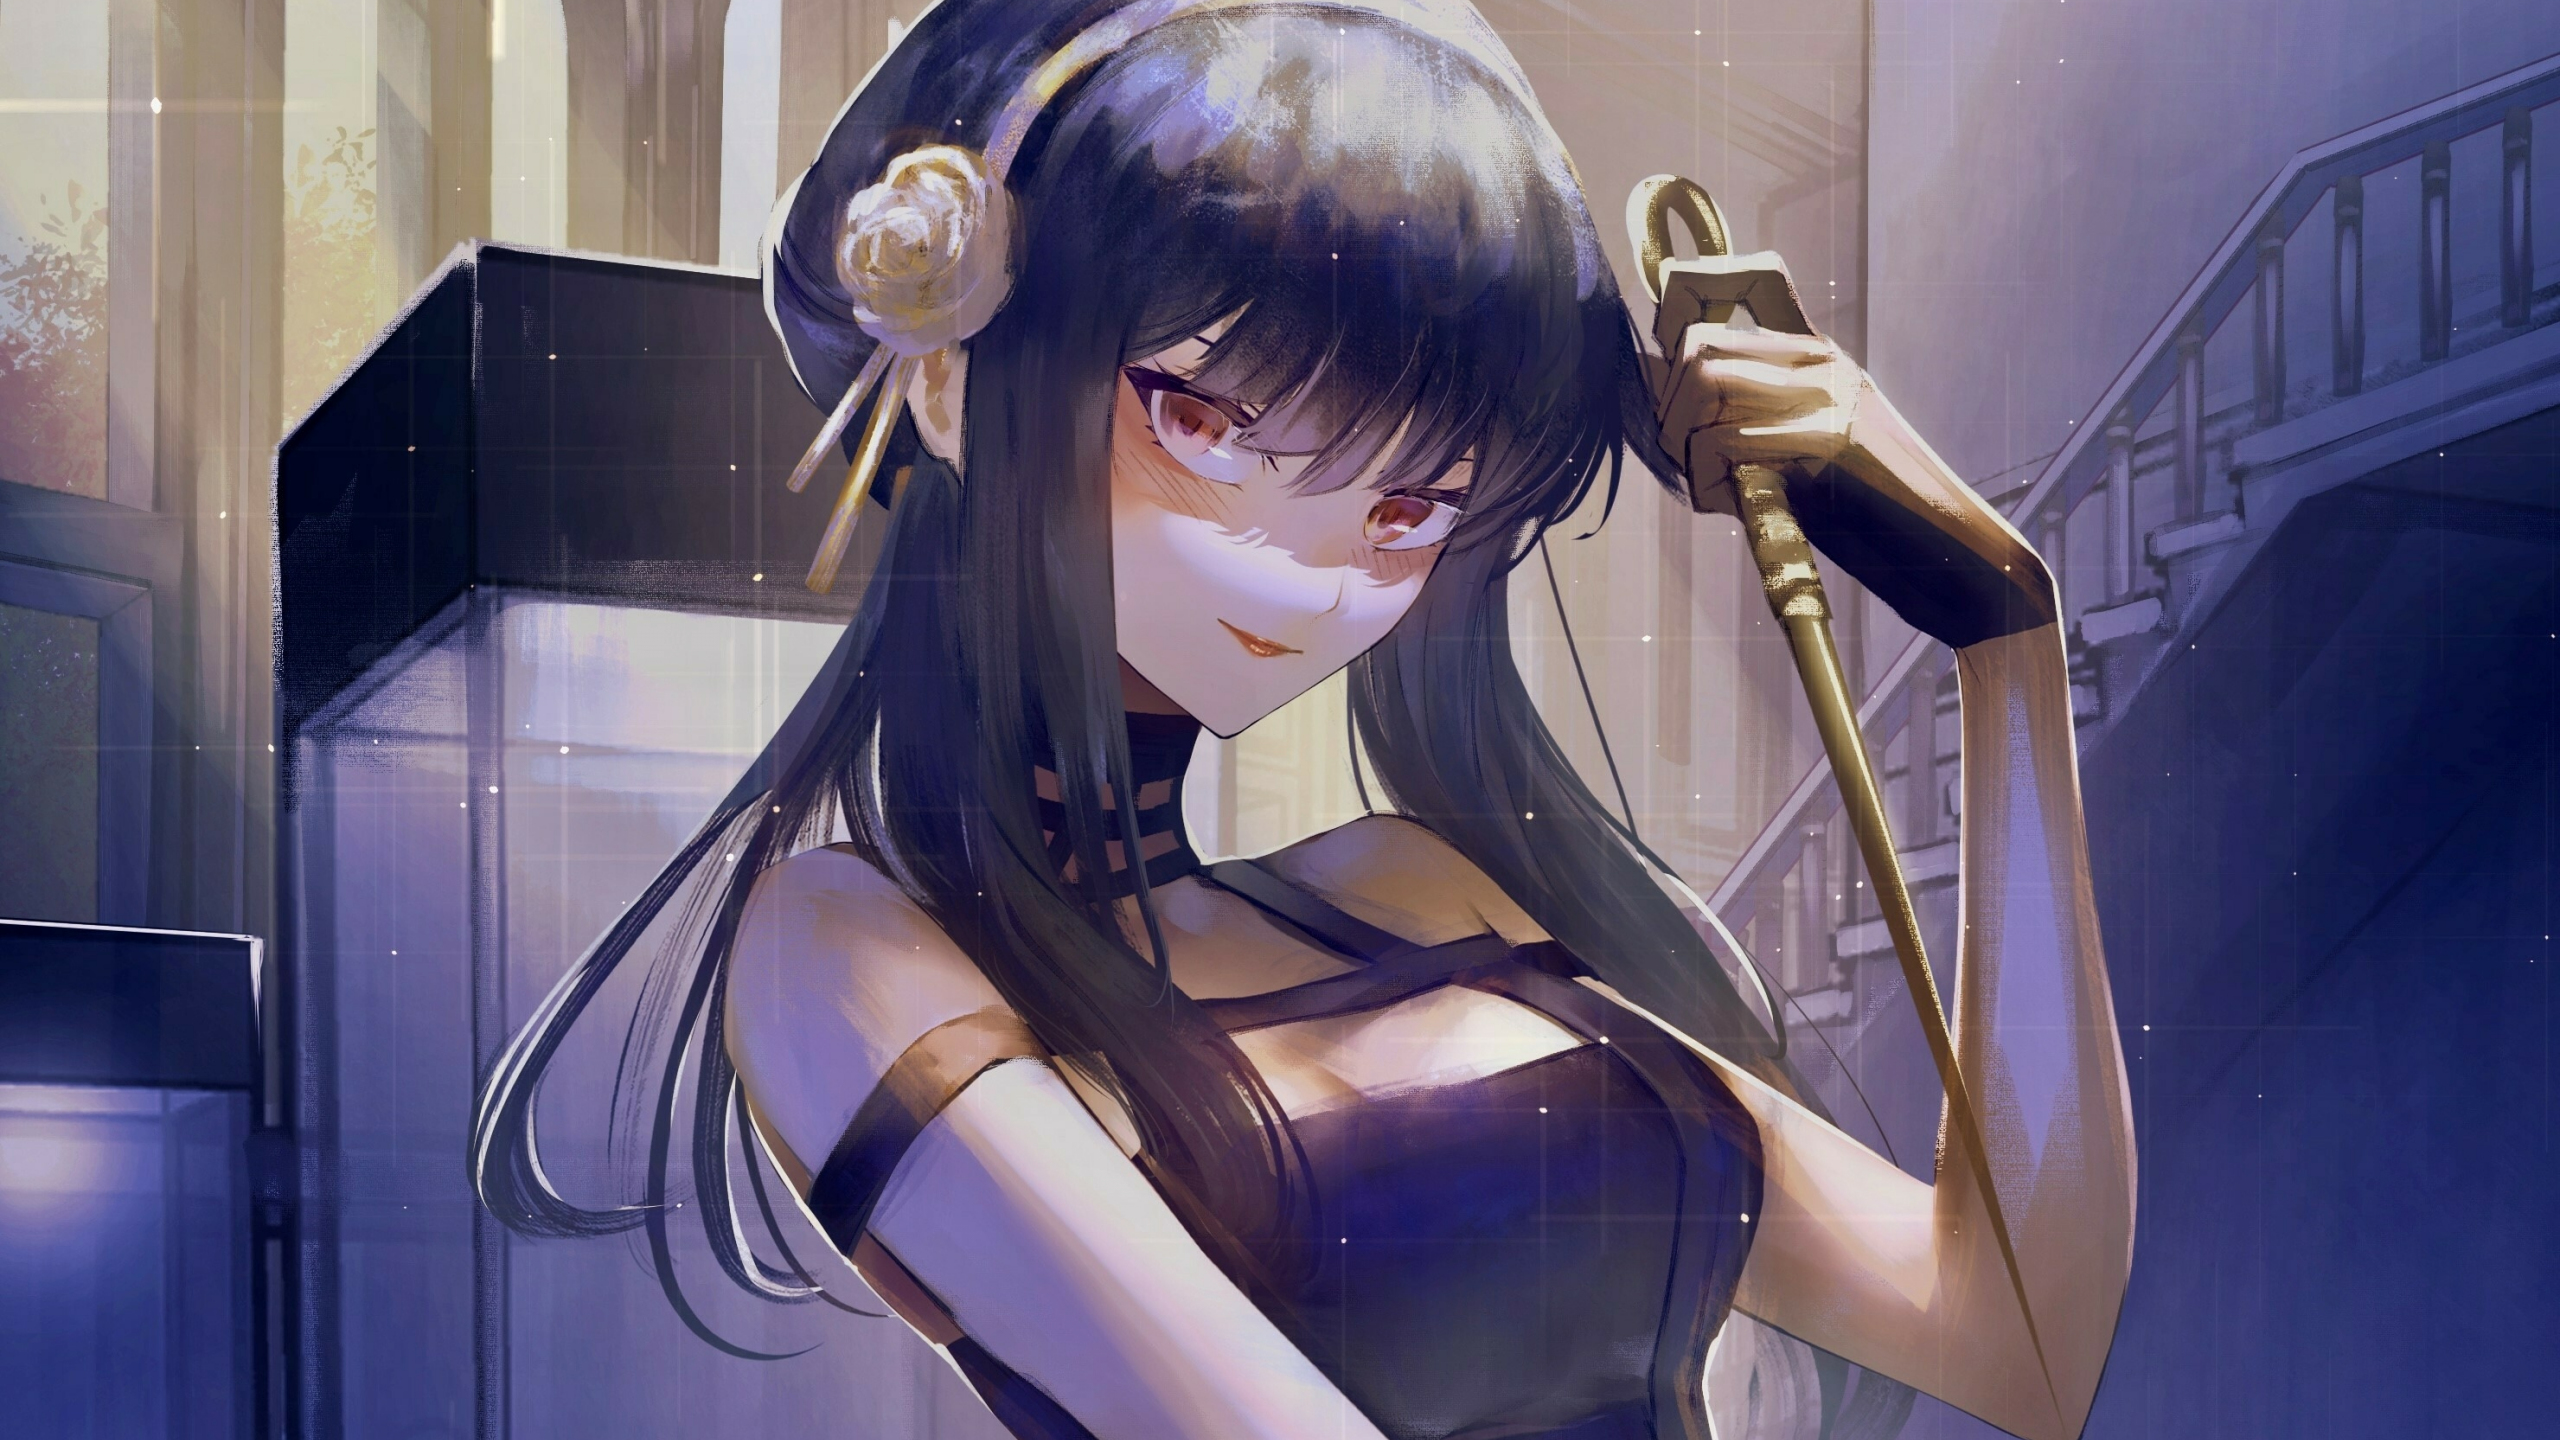 Download wallpaper 2560x1440 yor forger, spy, anime girl, dual wide 16:9  2560x1440 hd background, 28038